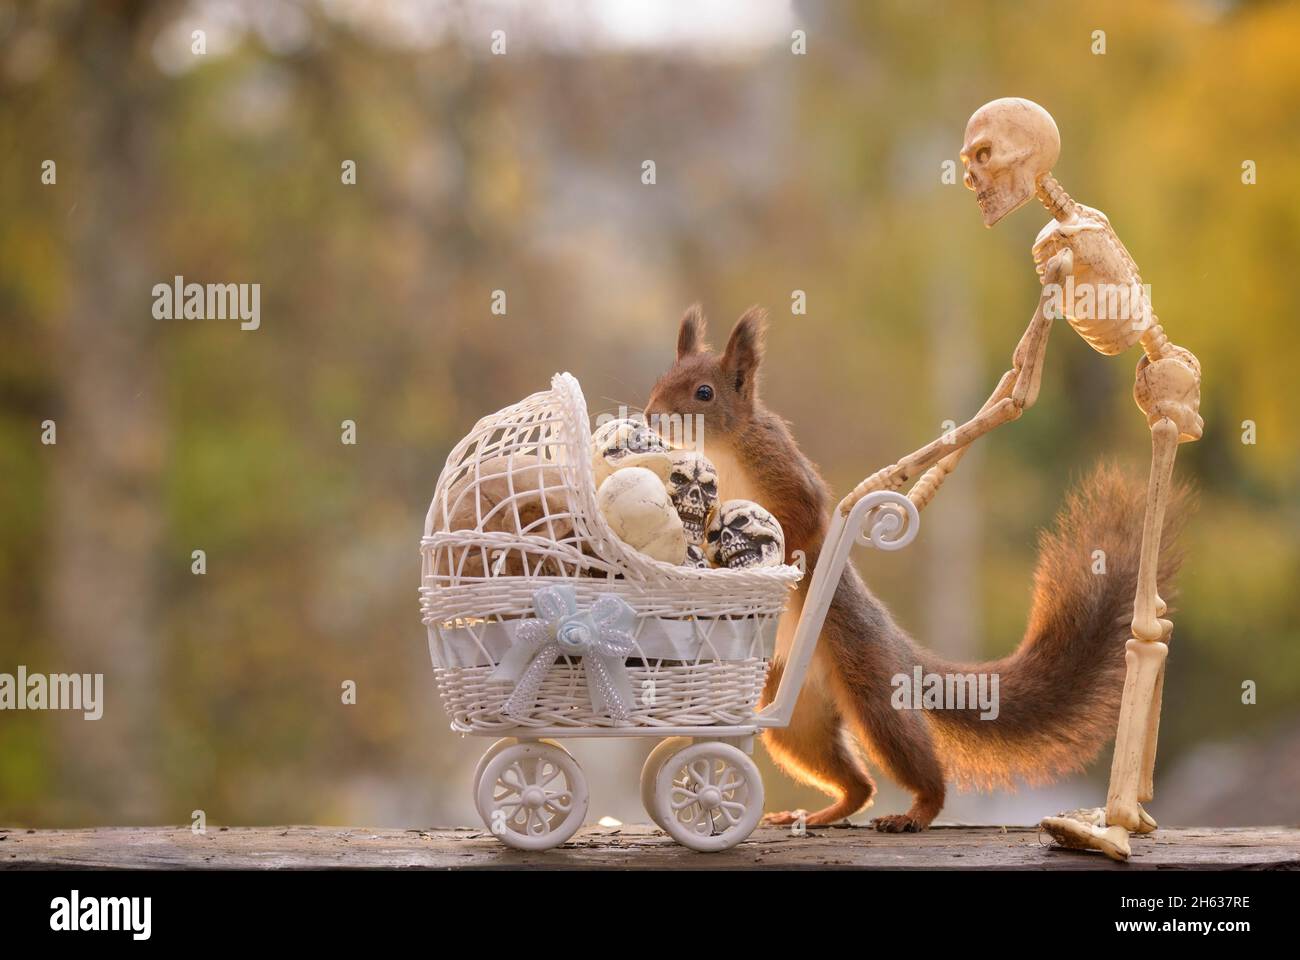 skulls and red squirrel with a stroller and a skeleton Stock Photo